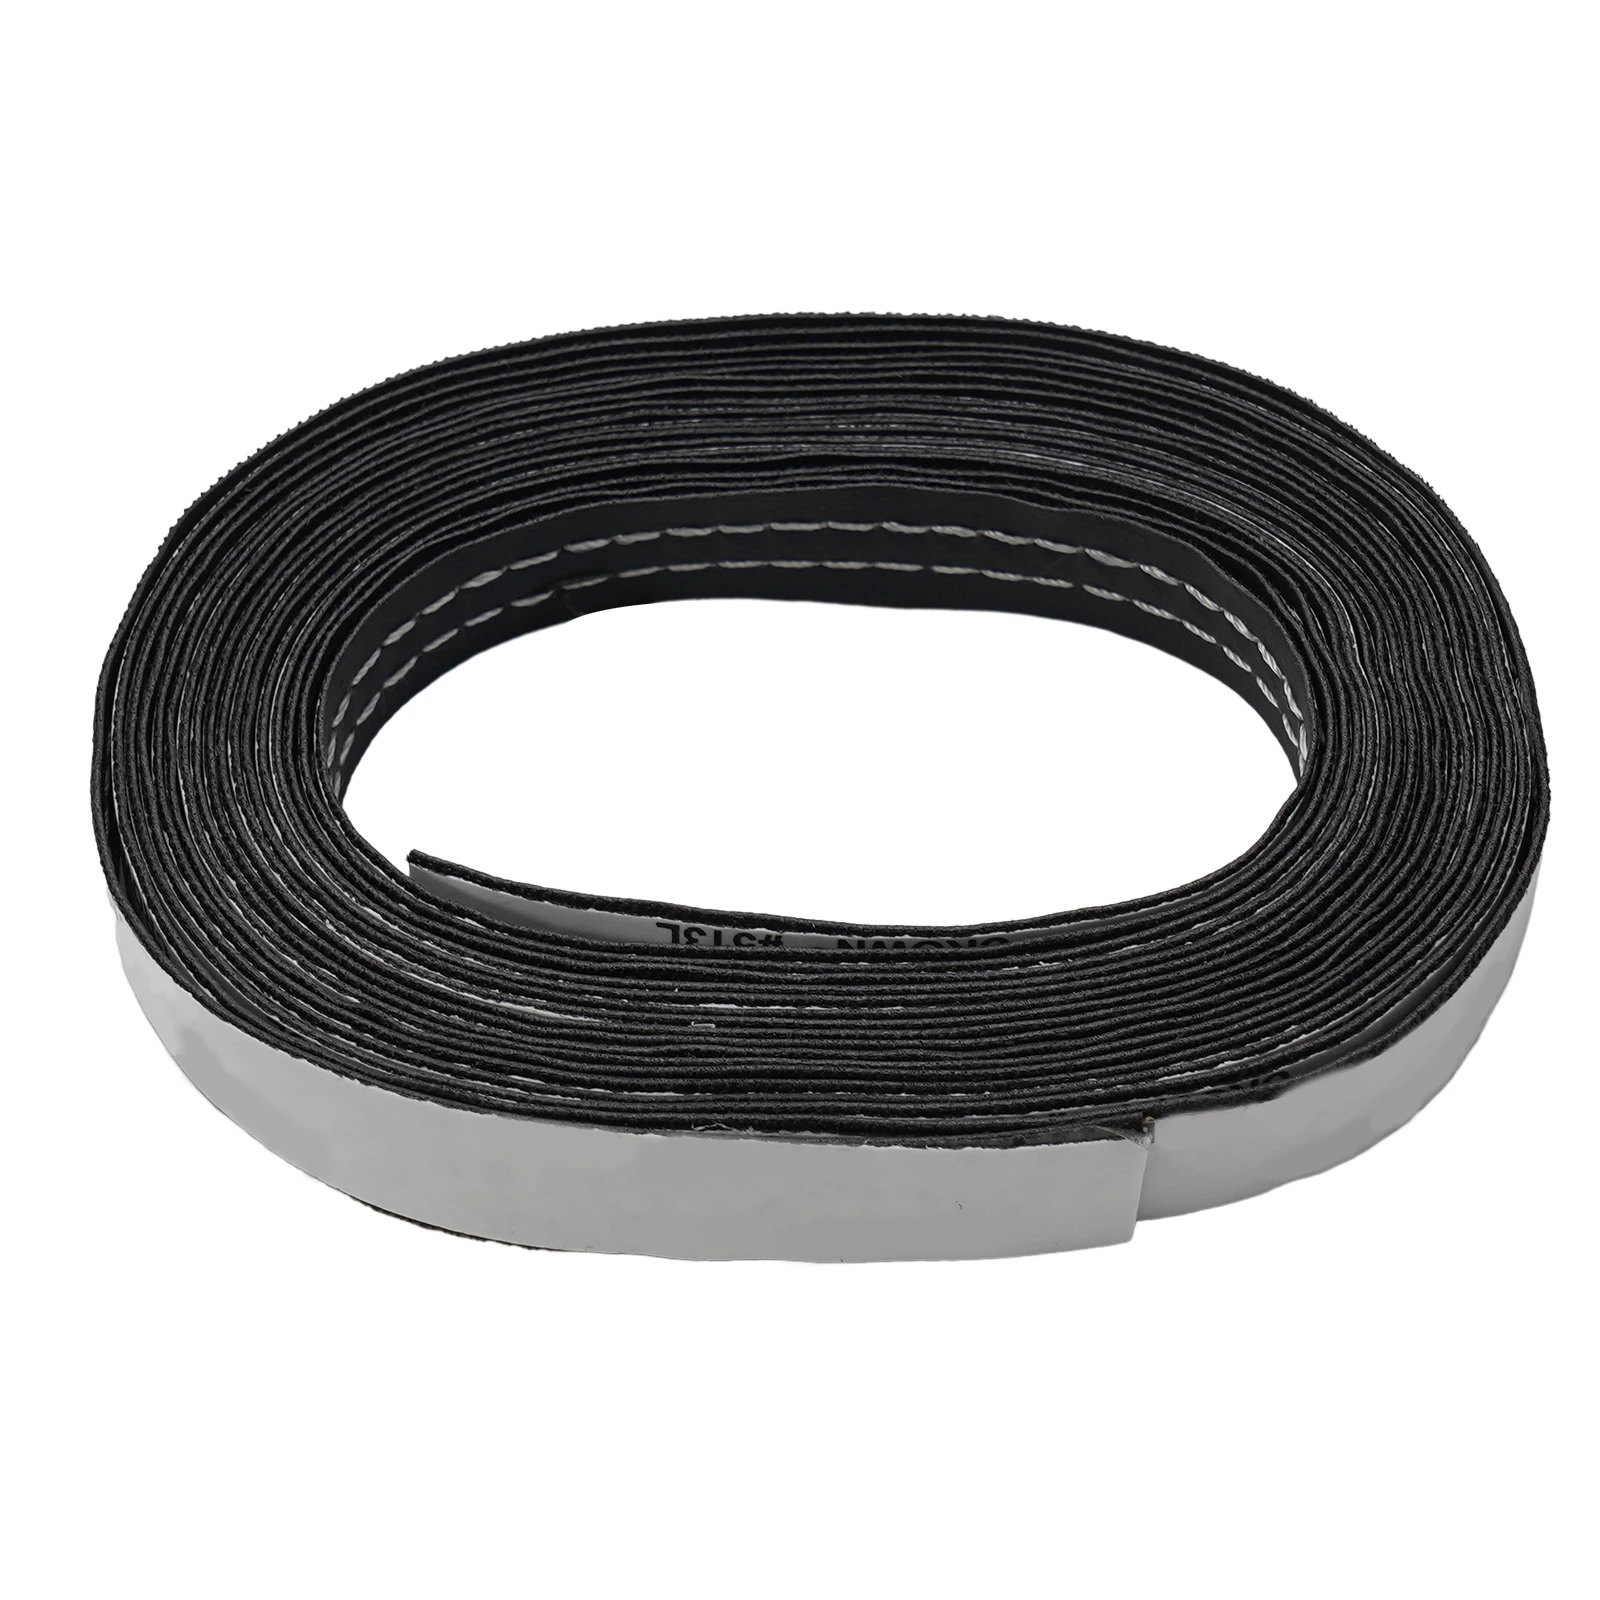 

Moulding Trim Strip 1.5CM Width 4M Length Black High Quality Leather Universal White Line Dashboard Direct Fit